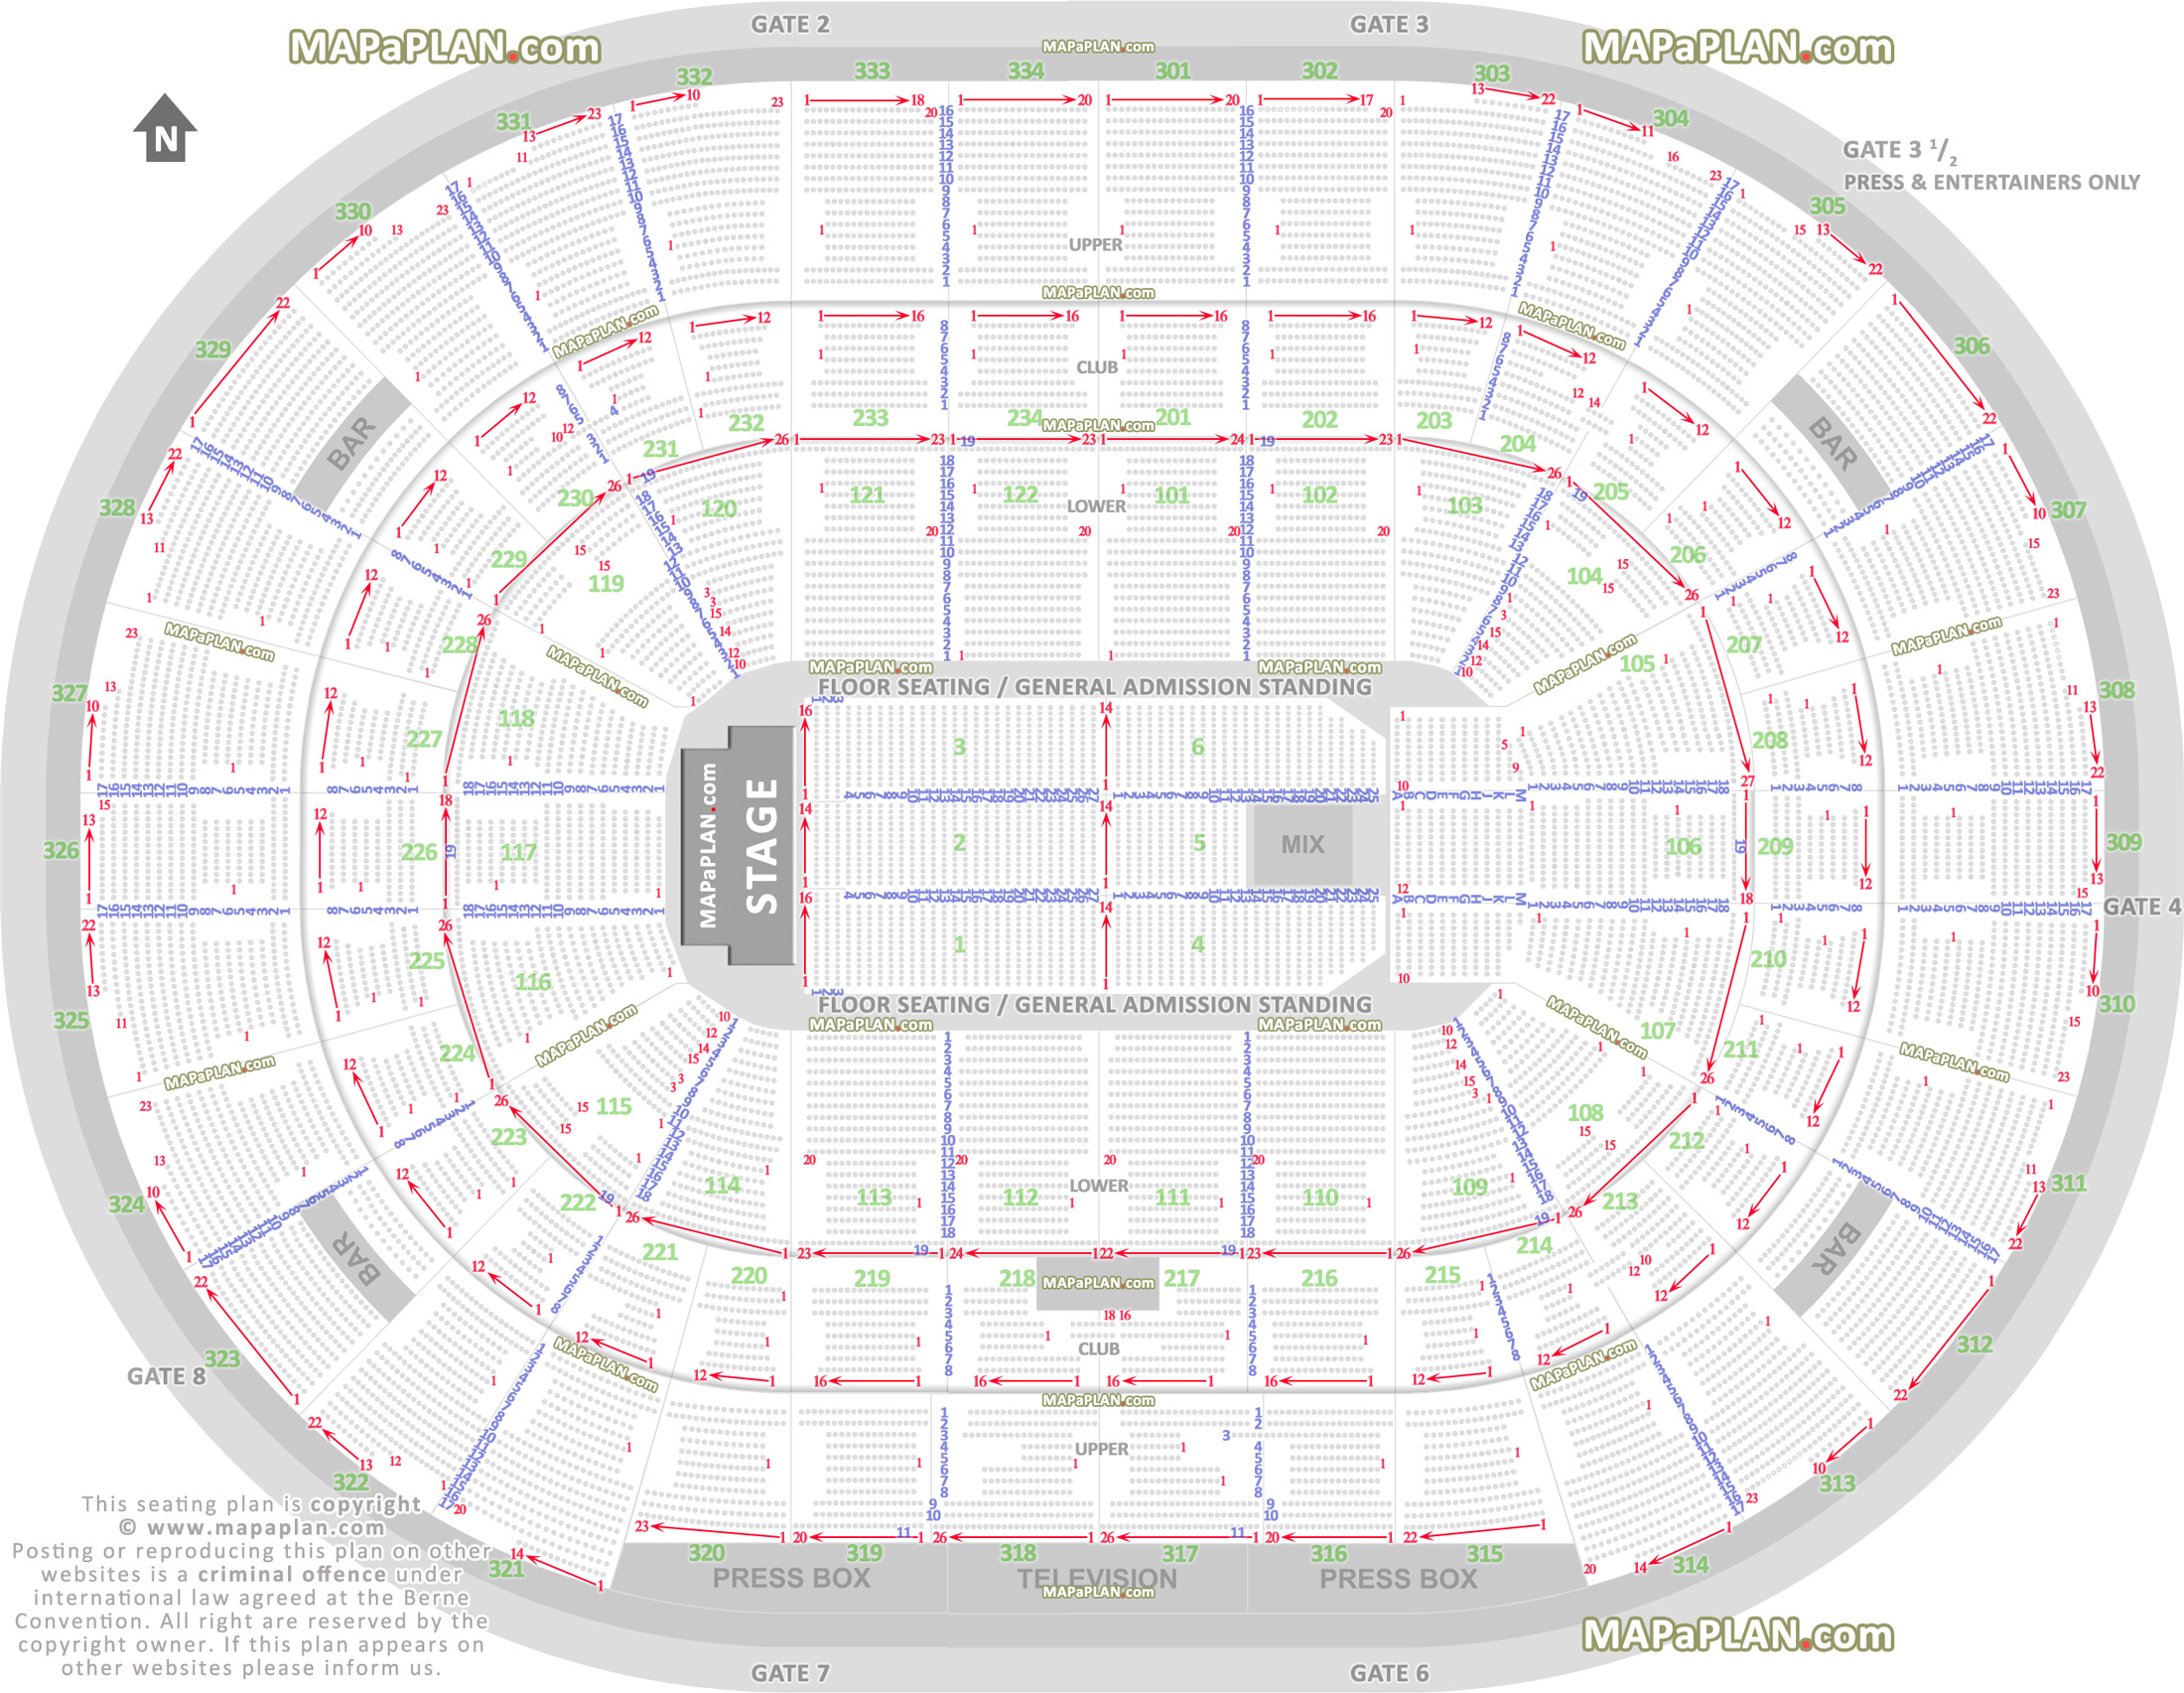 detailed seat row numbers end stage full concert sections floor plan arena lower club upper bowl layout Chicago United Center seating chart